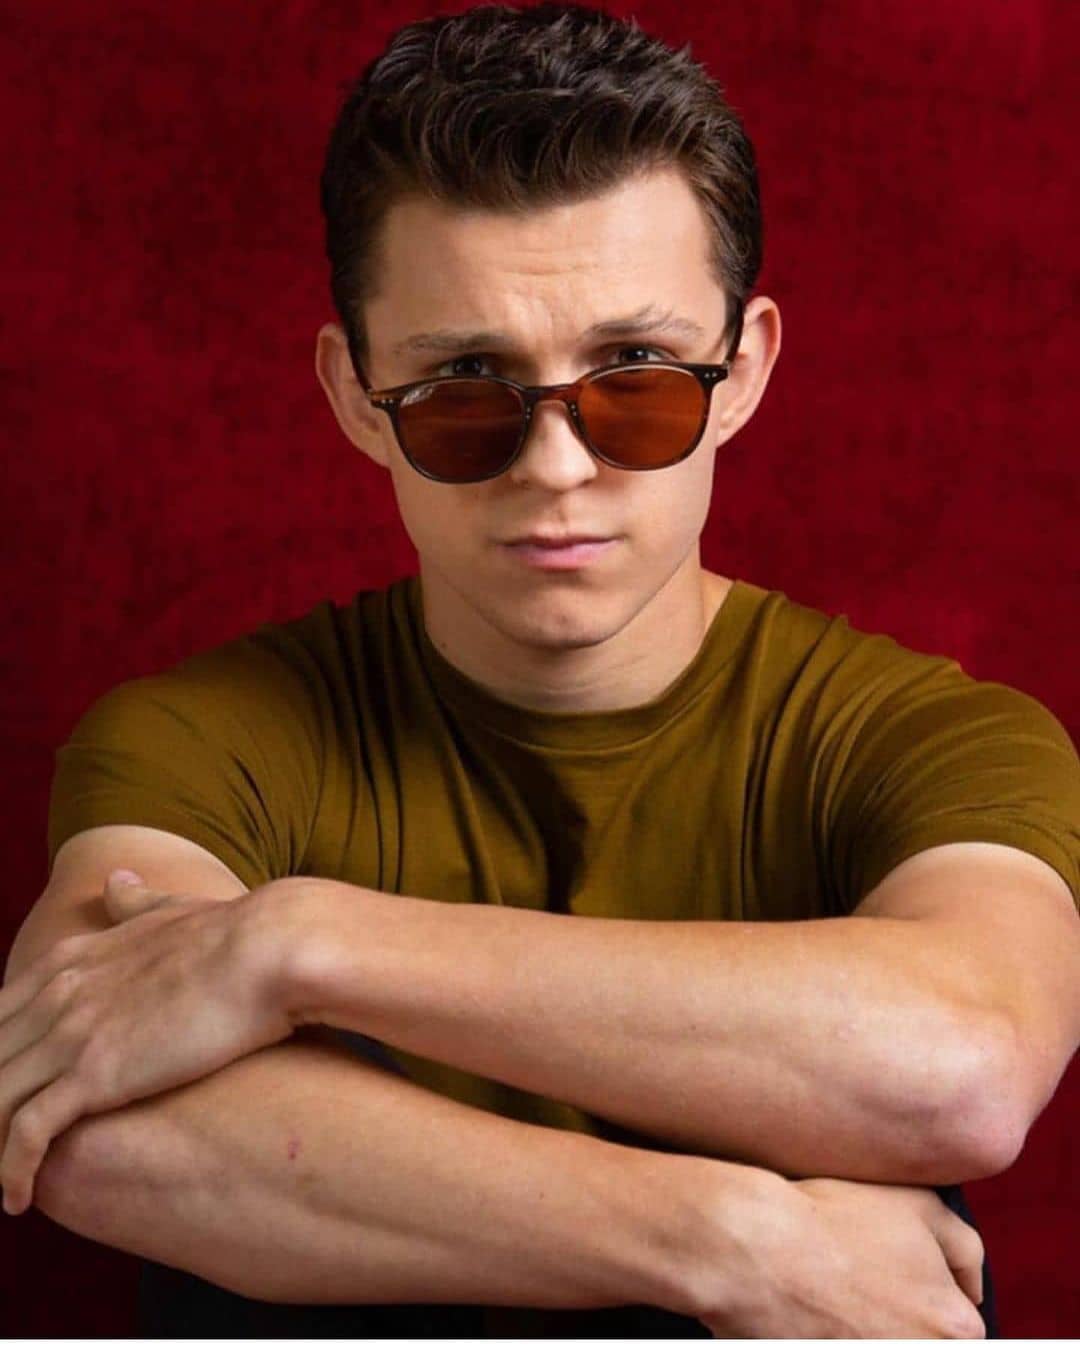 Tom Holland - Biography, Profile, Facts and Career